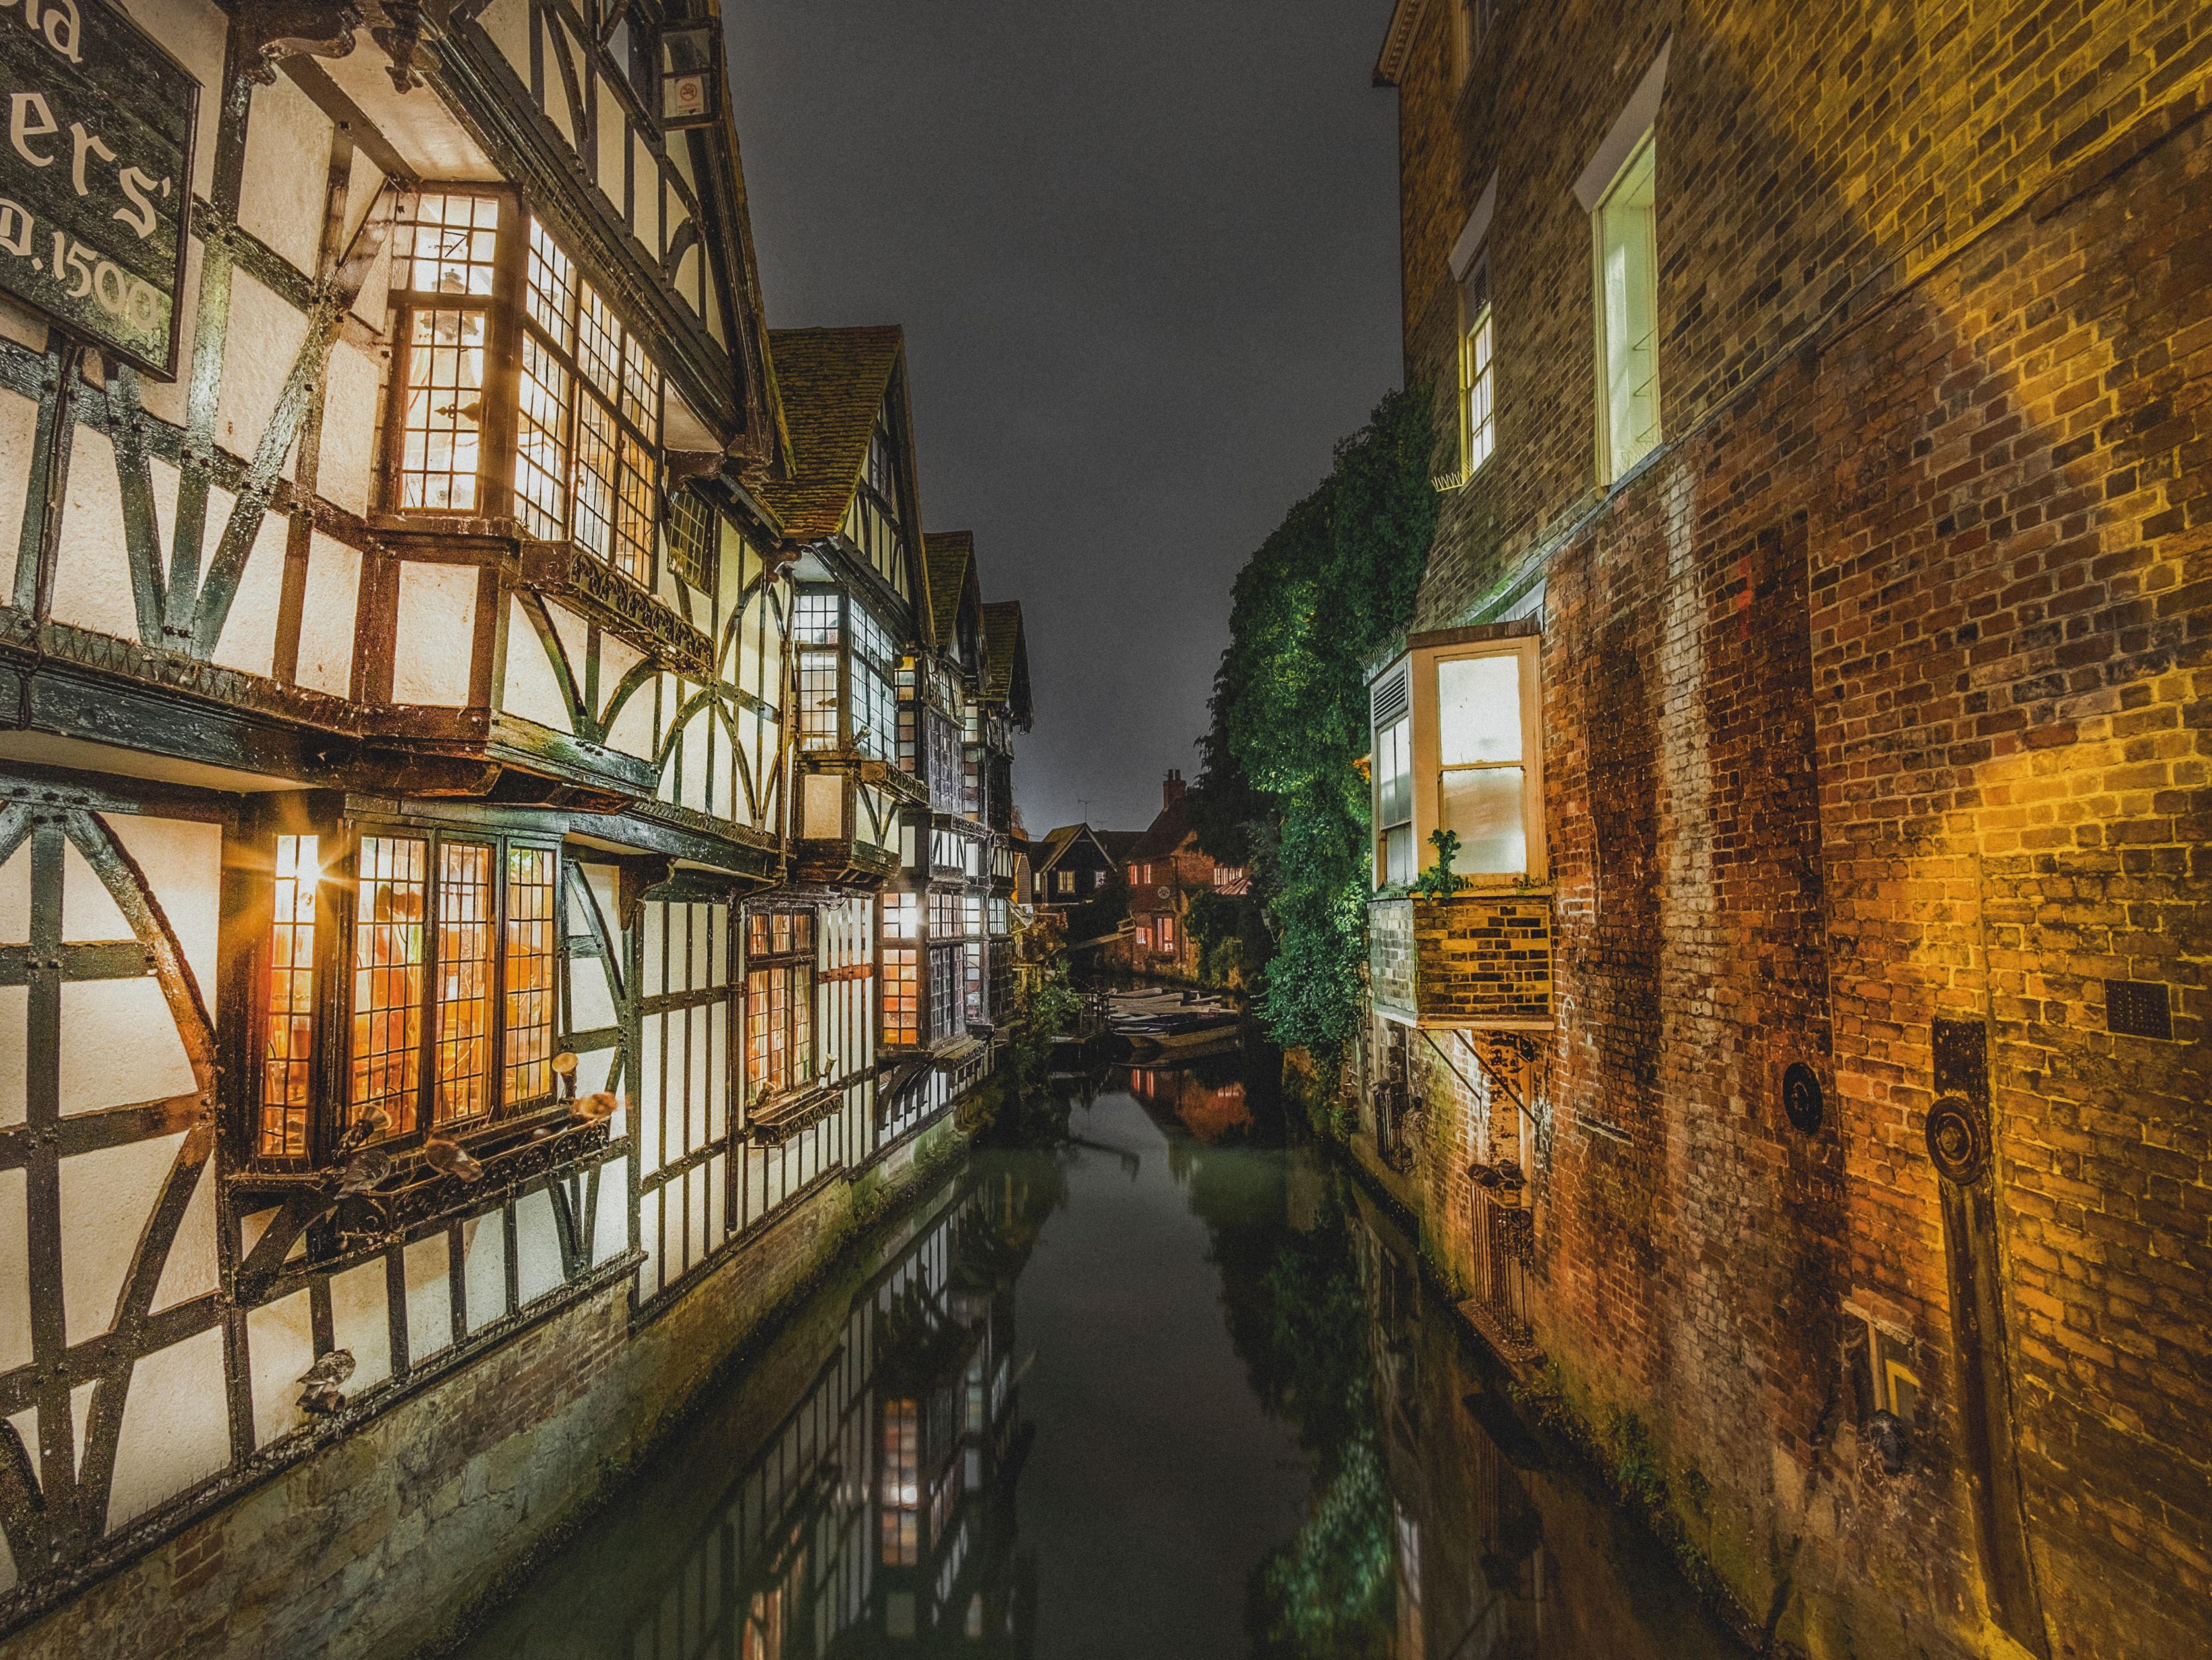 The historic Old Weavers House in Canterbury